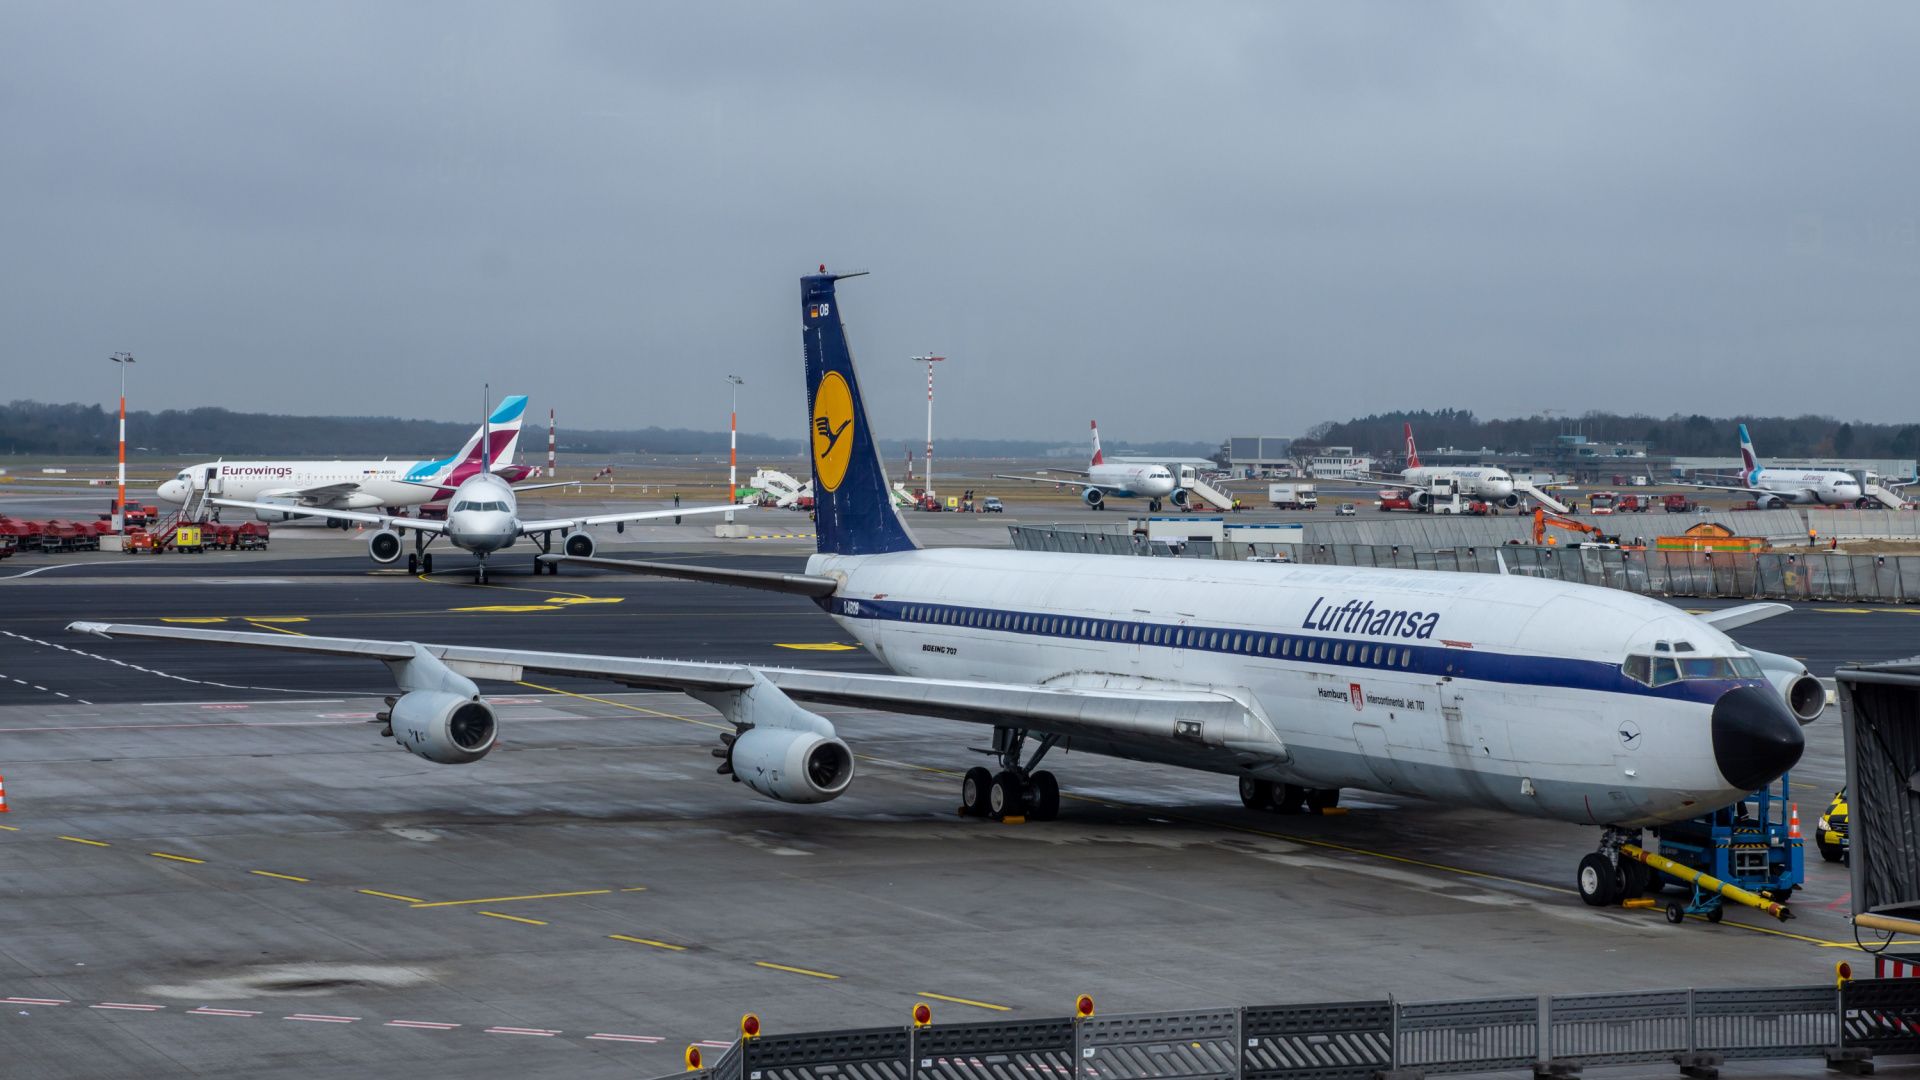 A Lufthansa Boeing 707 parked at an airport.